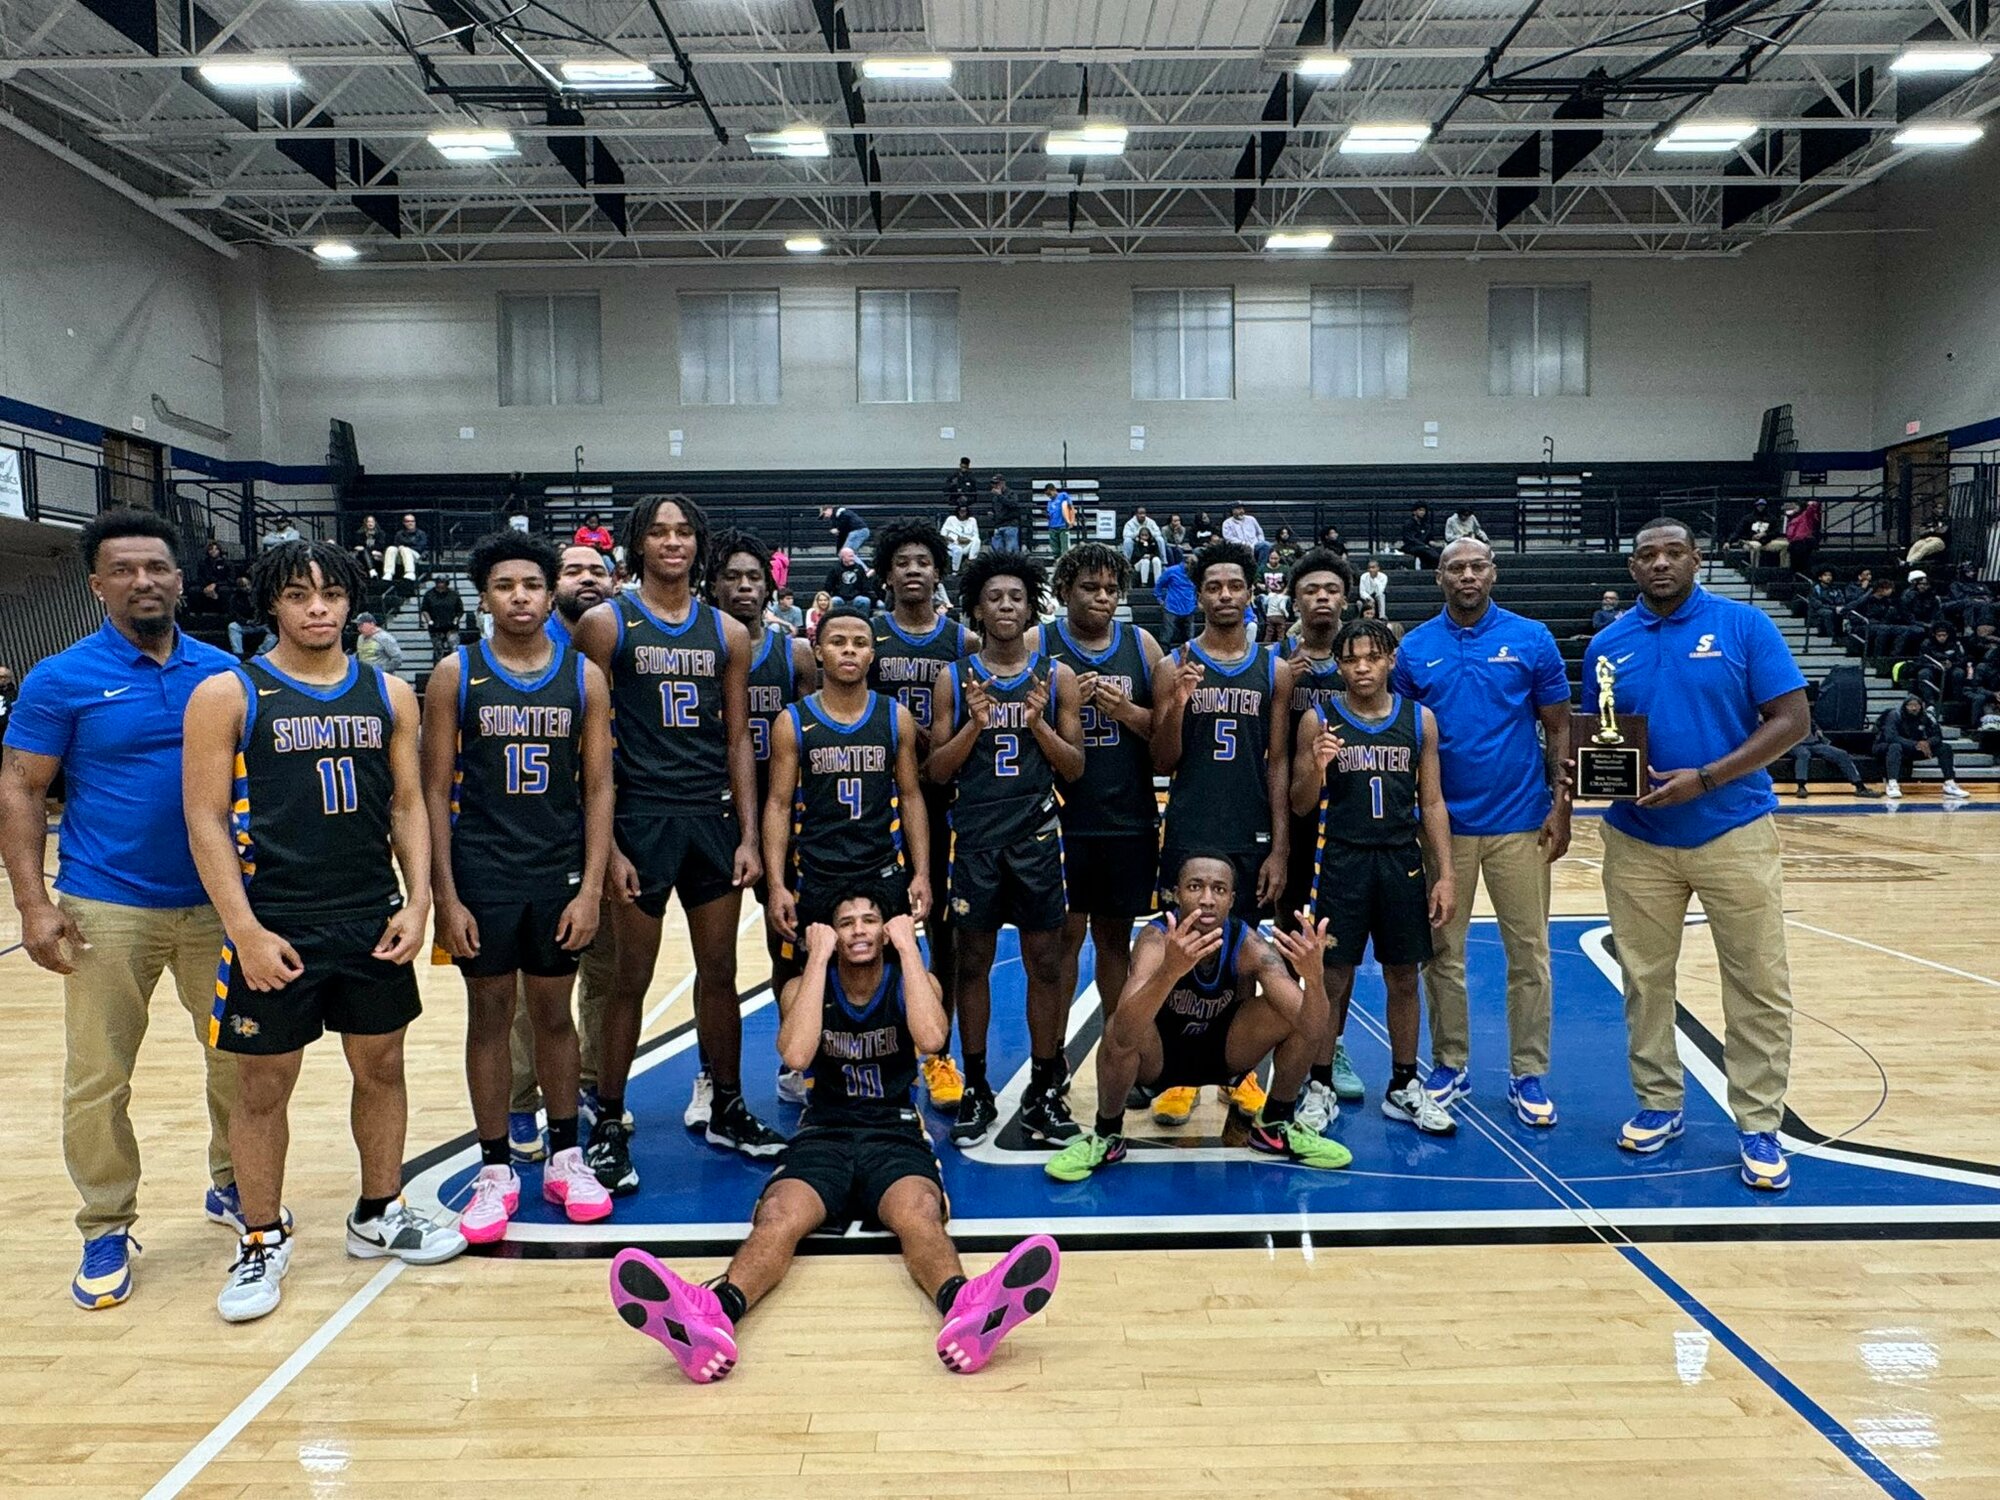 The Sumter High basketball team celebrates their win over South Pointe on Friday.